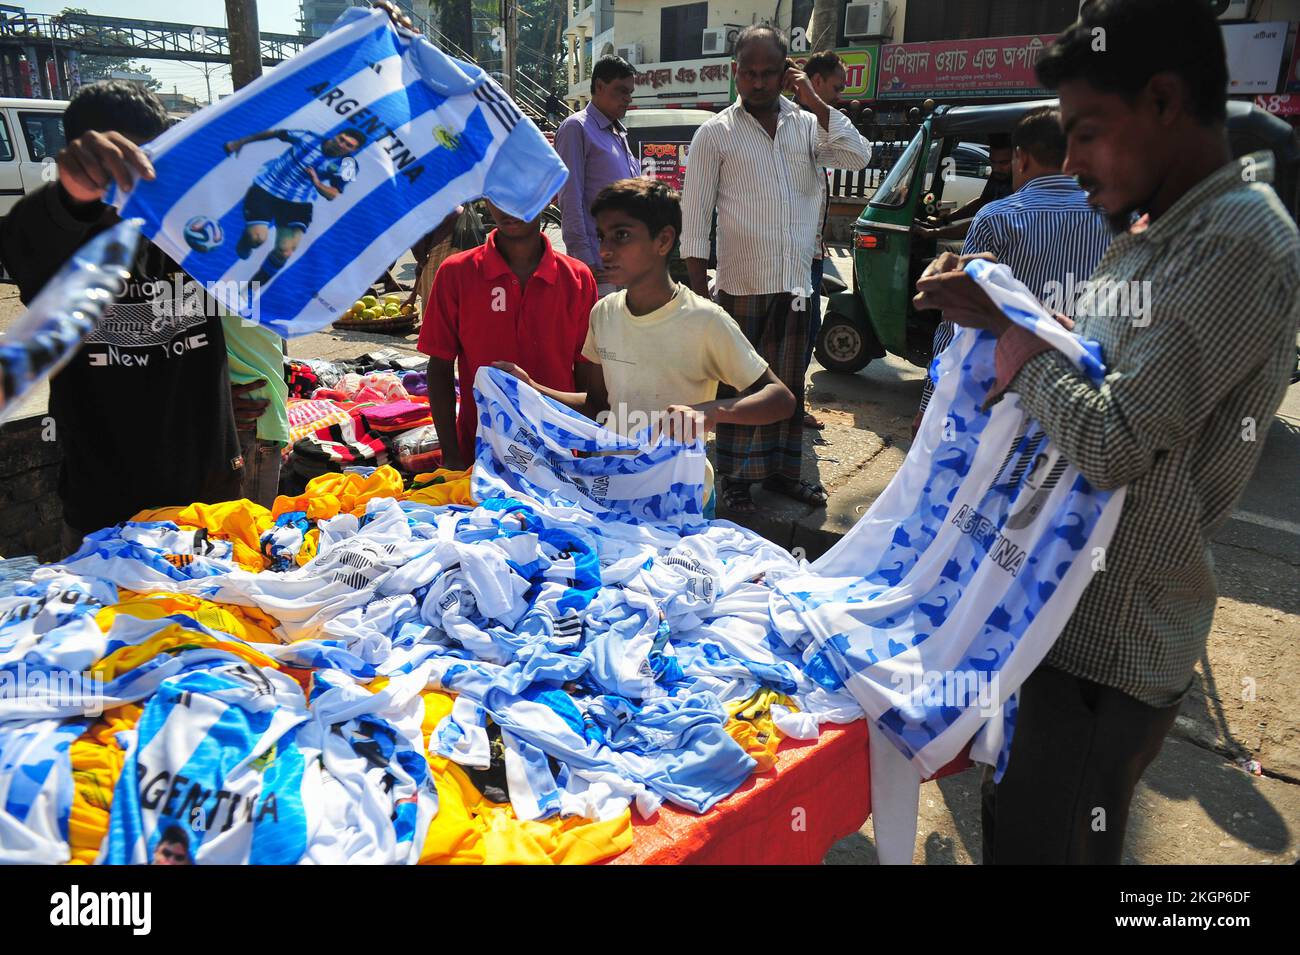 Nov 22, 2022, Sylhet, Bangladesh Fans buying jersey and Flags of their favorite football team at outside market during the FIFA World Cup 2022, todays match between Argentina vs Saudi Arabia .